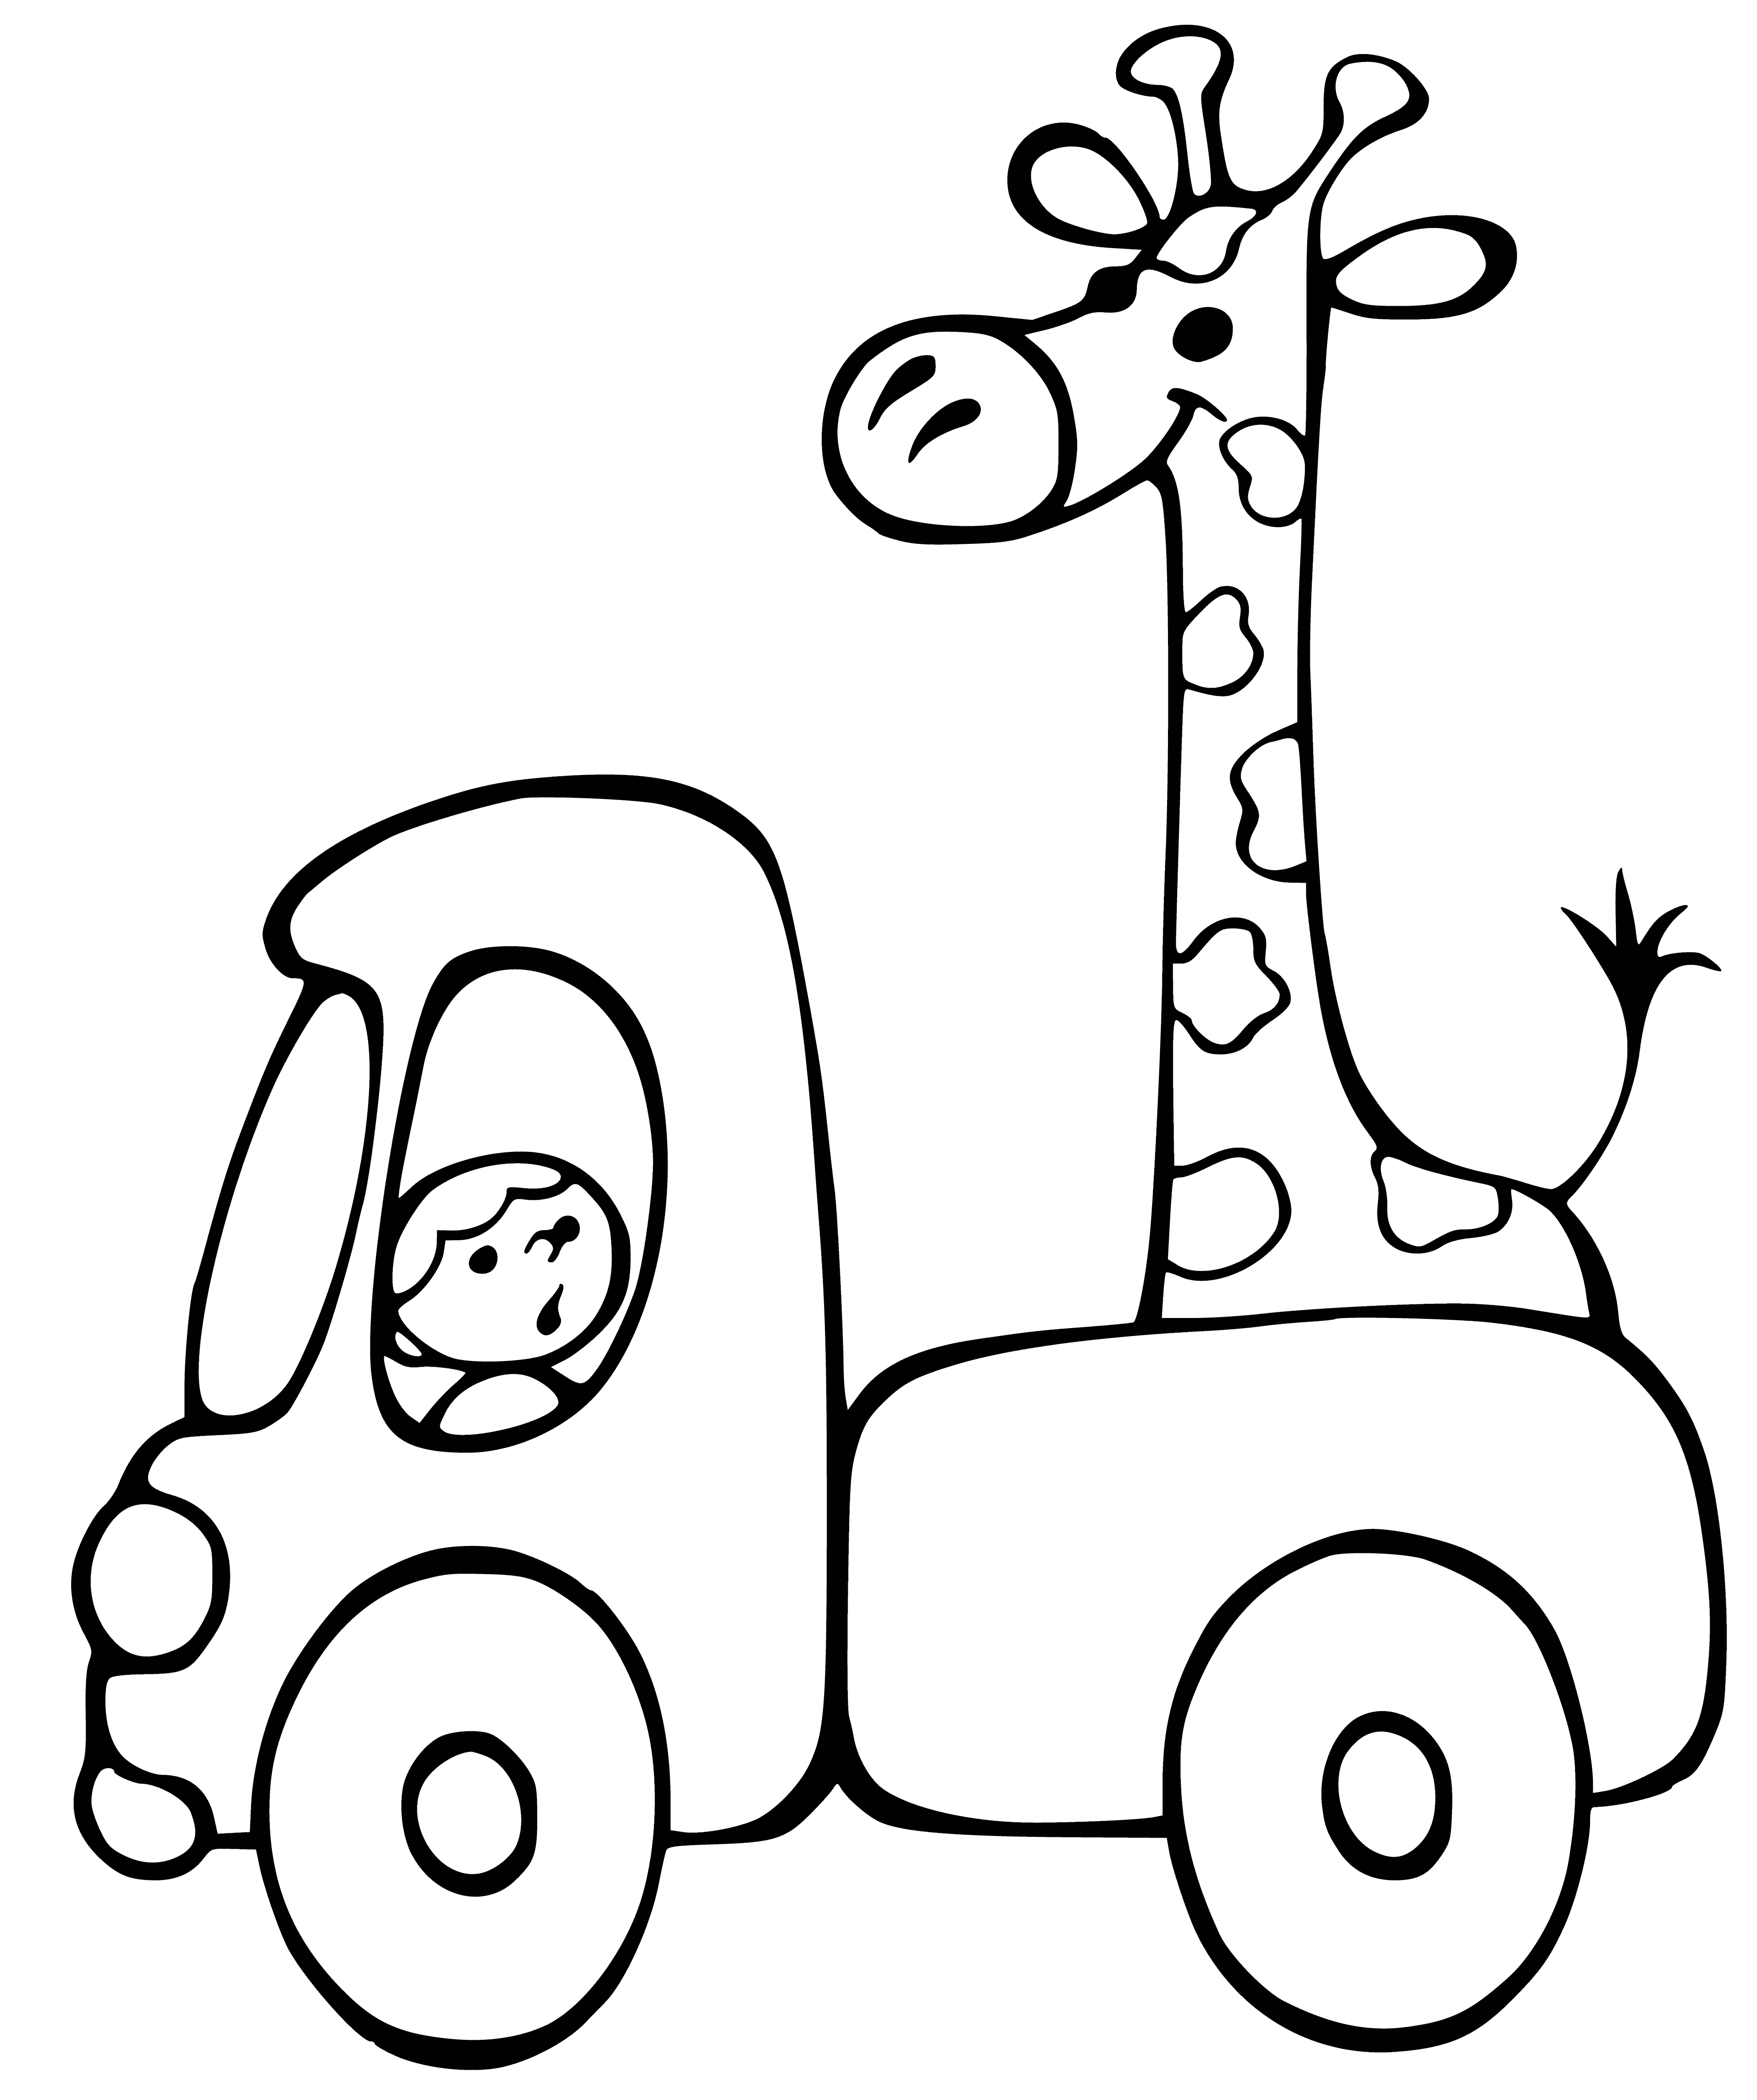 Giraffe in the car coloring page